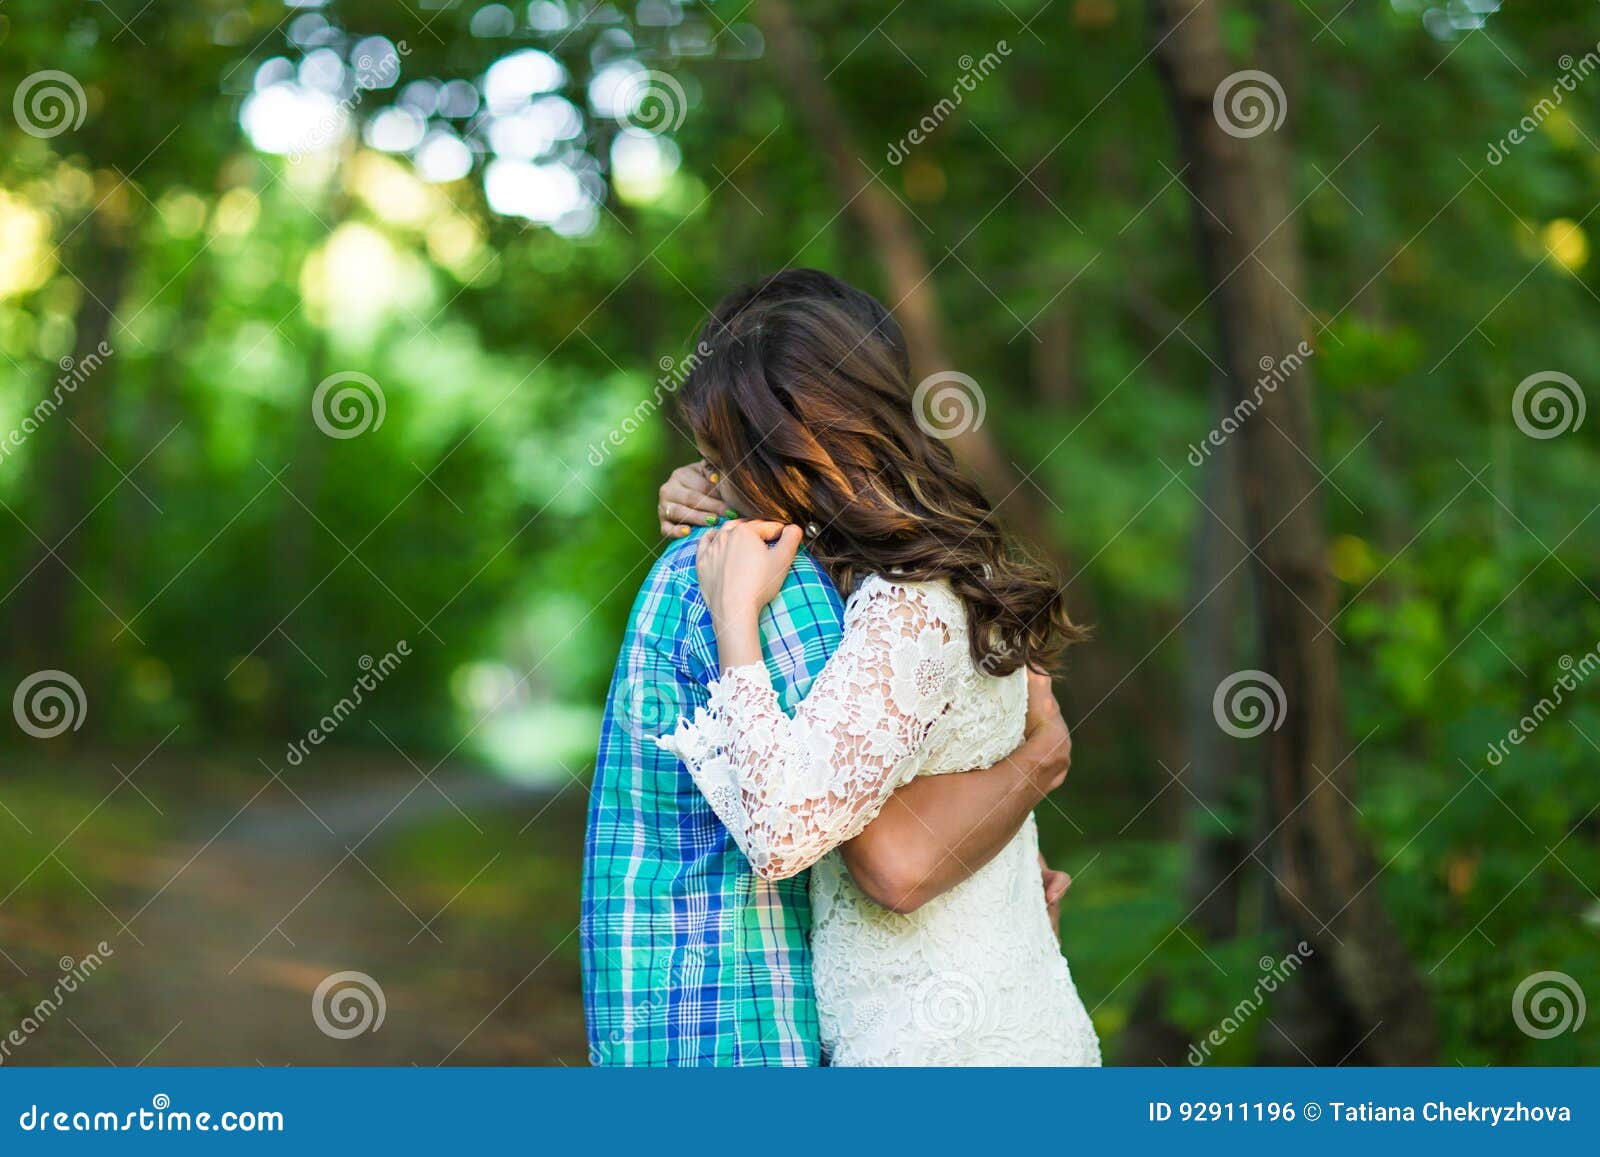 Portrait Of A Young Romantic Couple Embracing Each Other On Nature